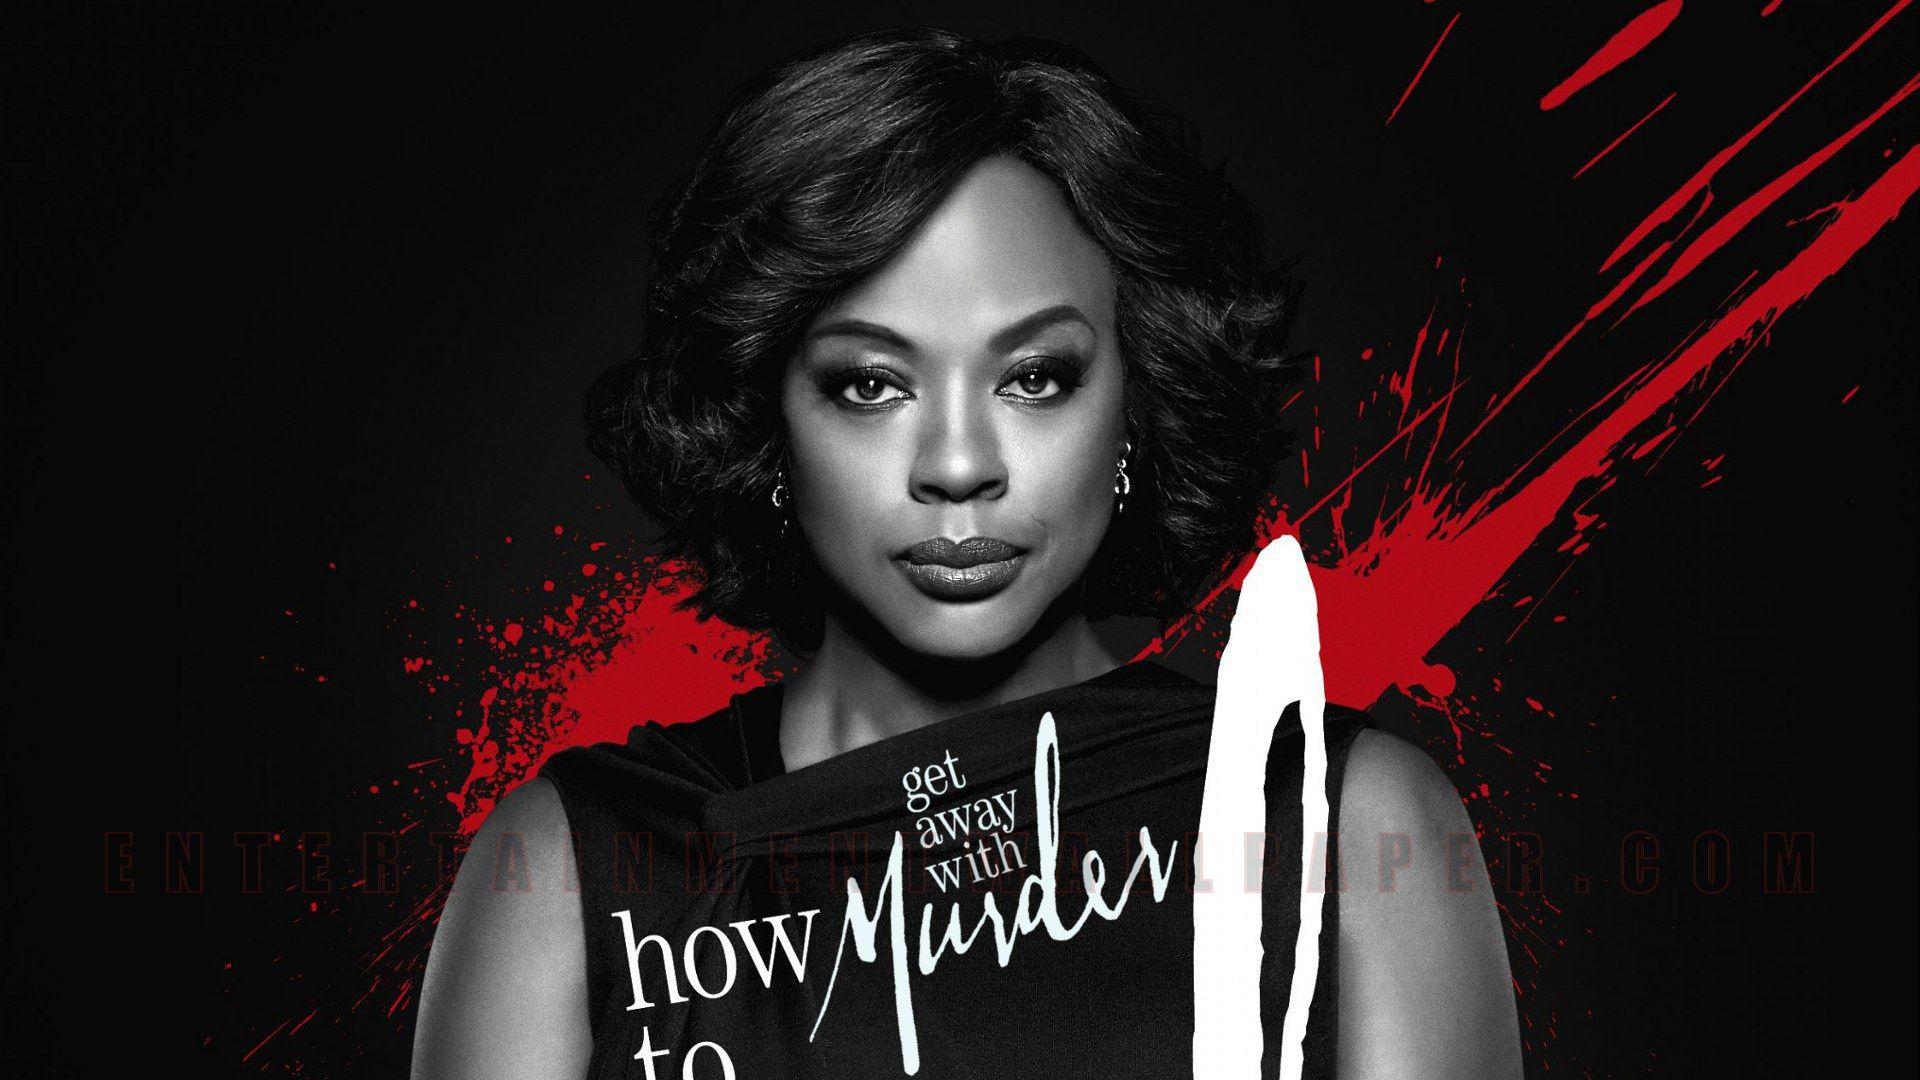 How to Get Away with Murder Wallpaper - 1920x1080